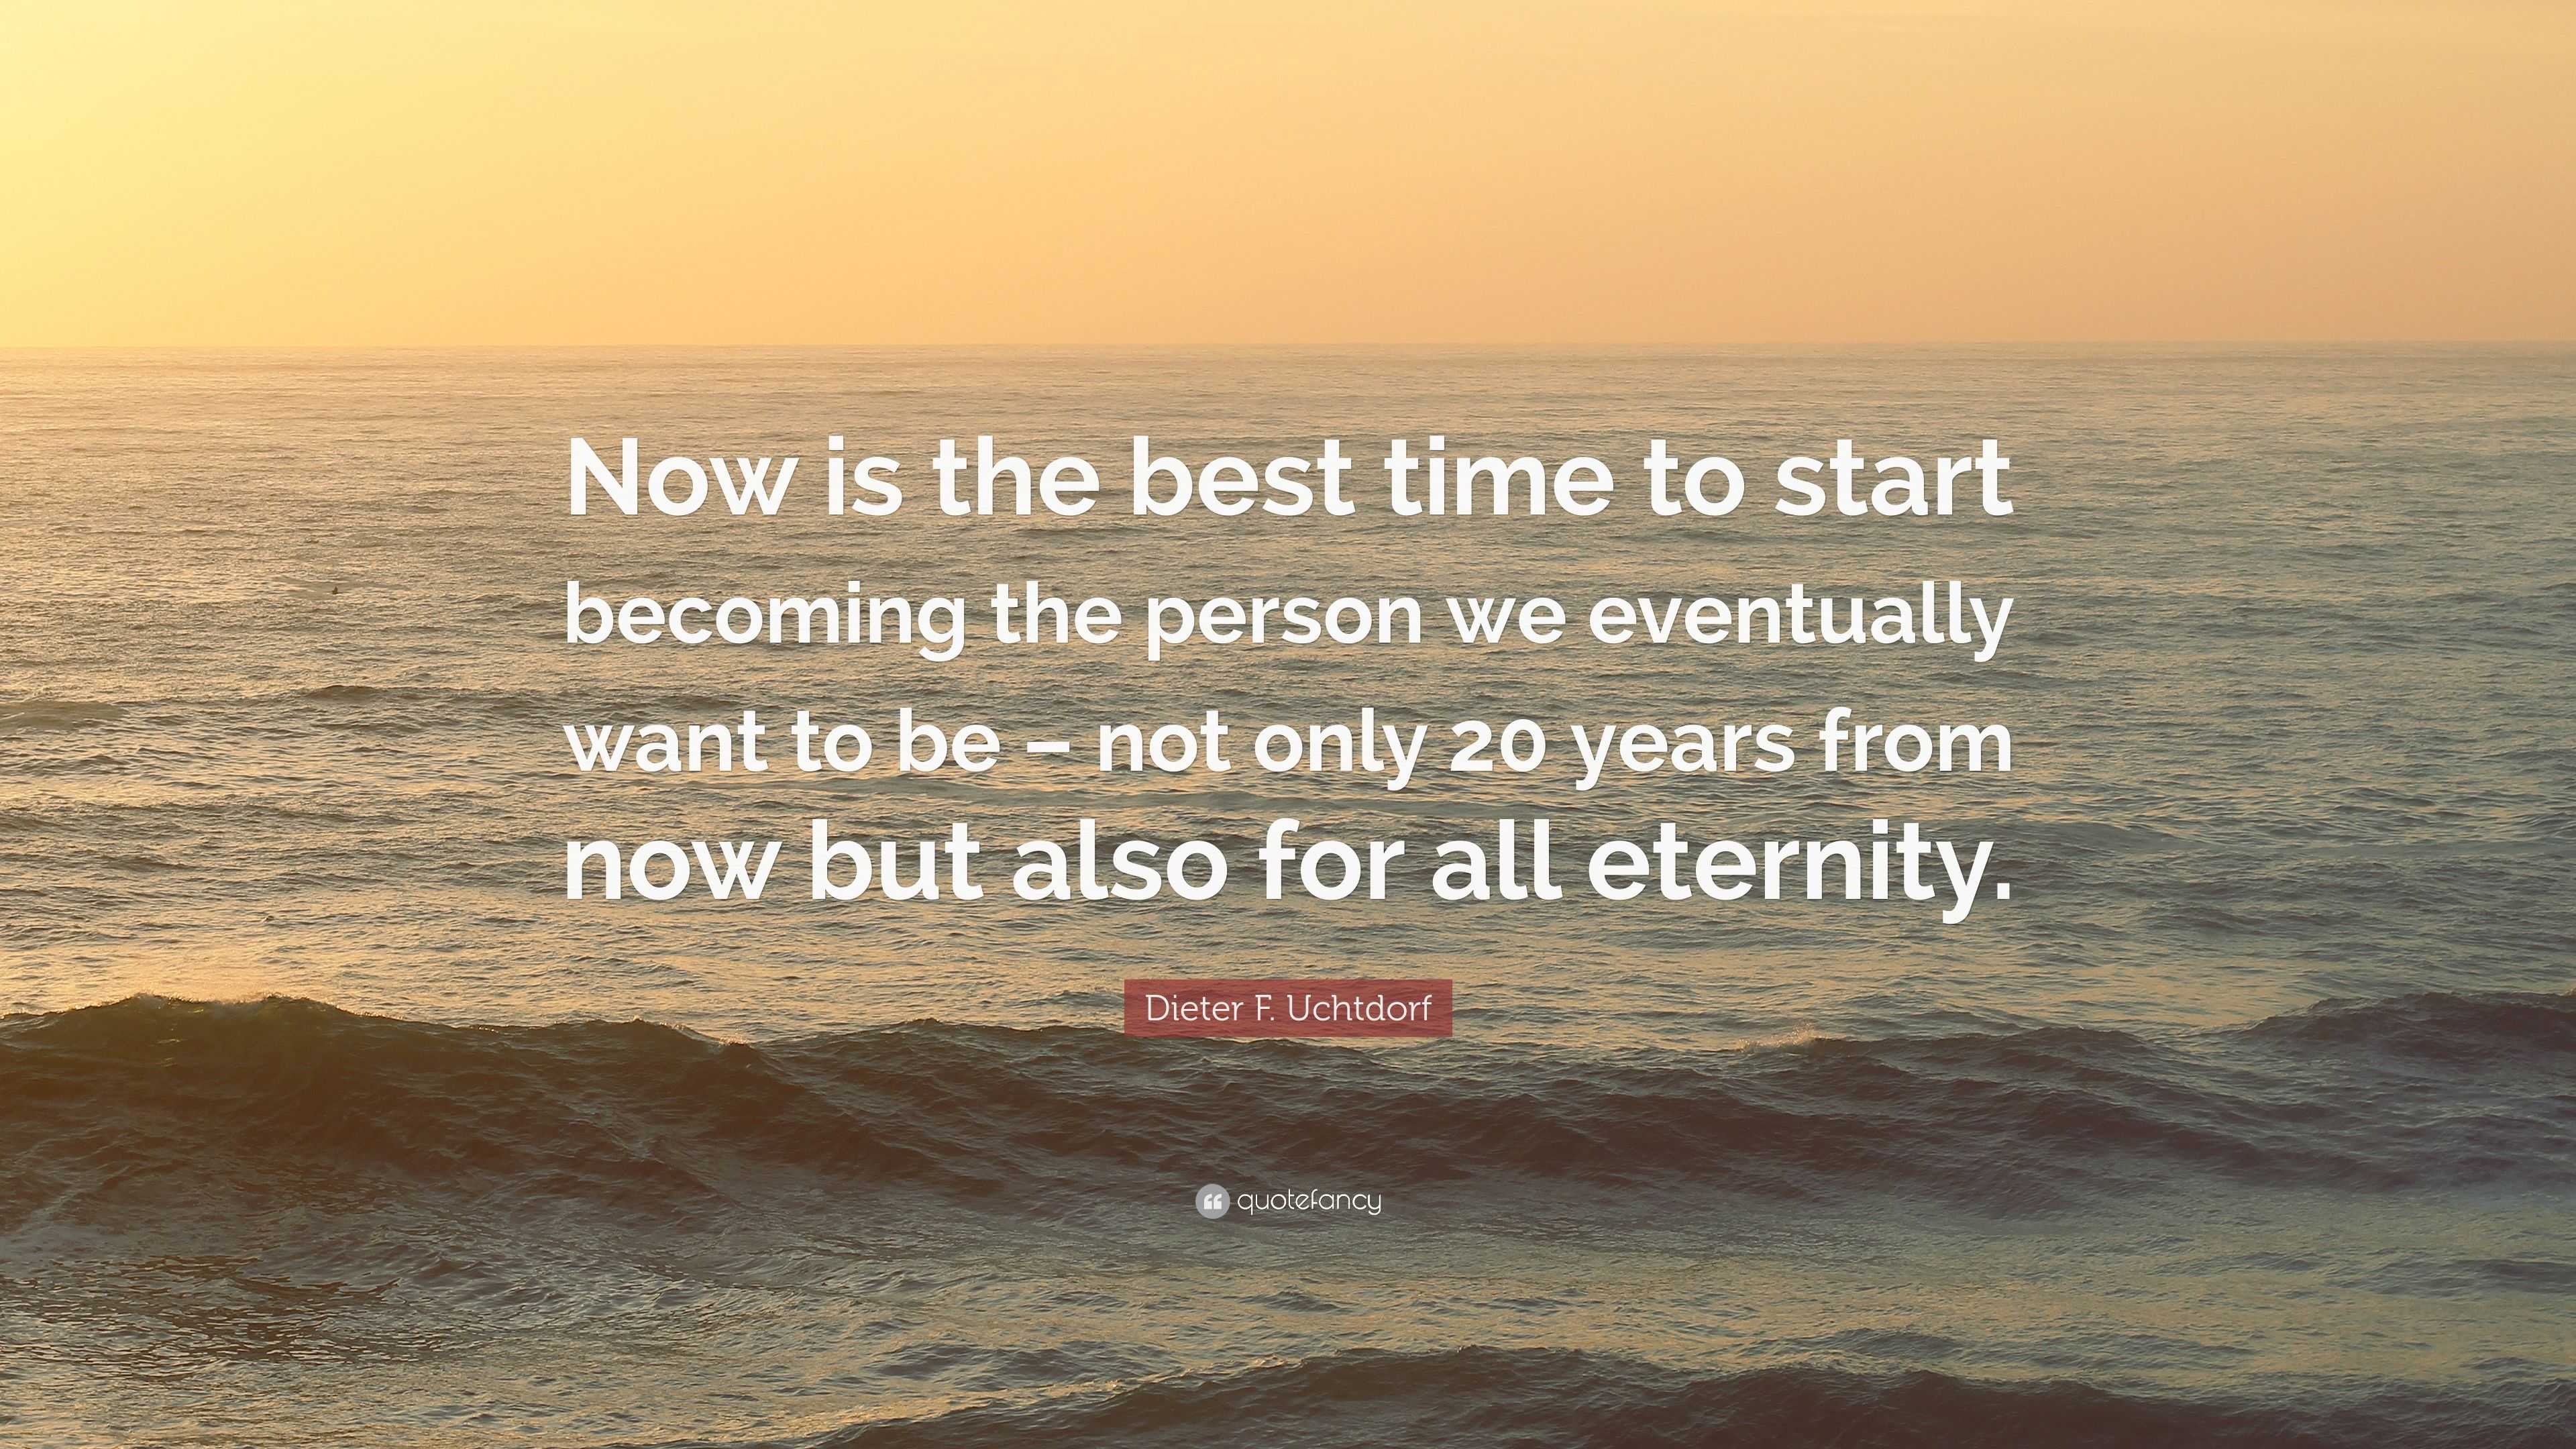 Dieter F. Uchtdorf Quote: “Now is the best time to start becoming the ...